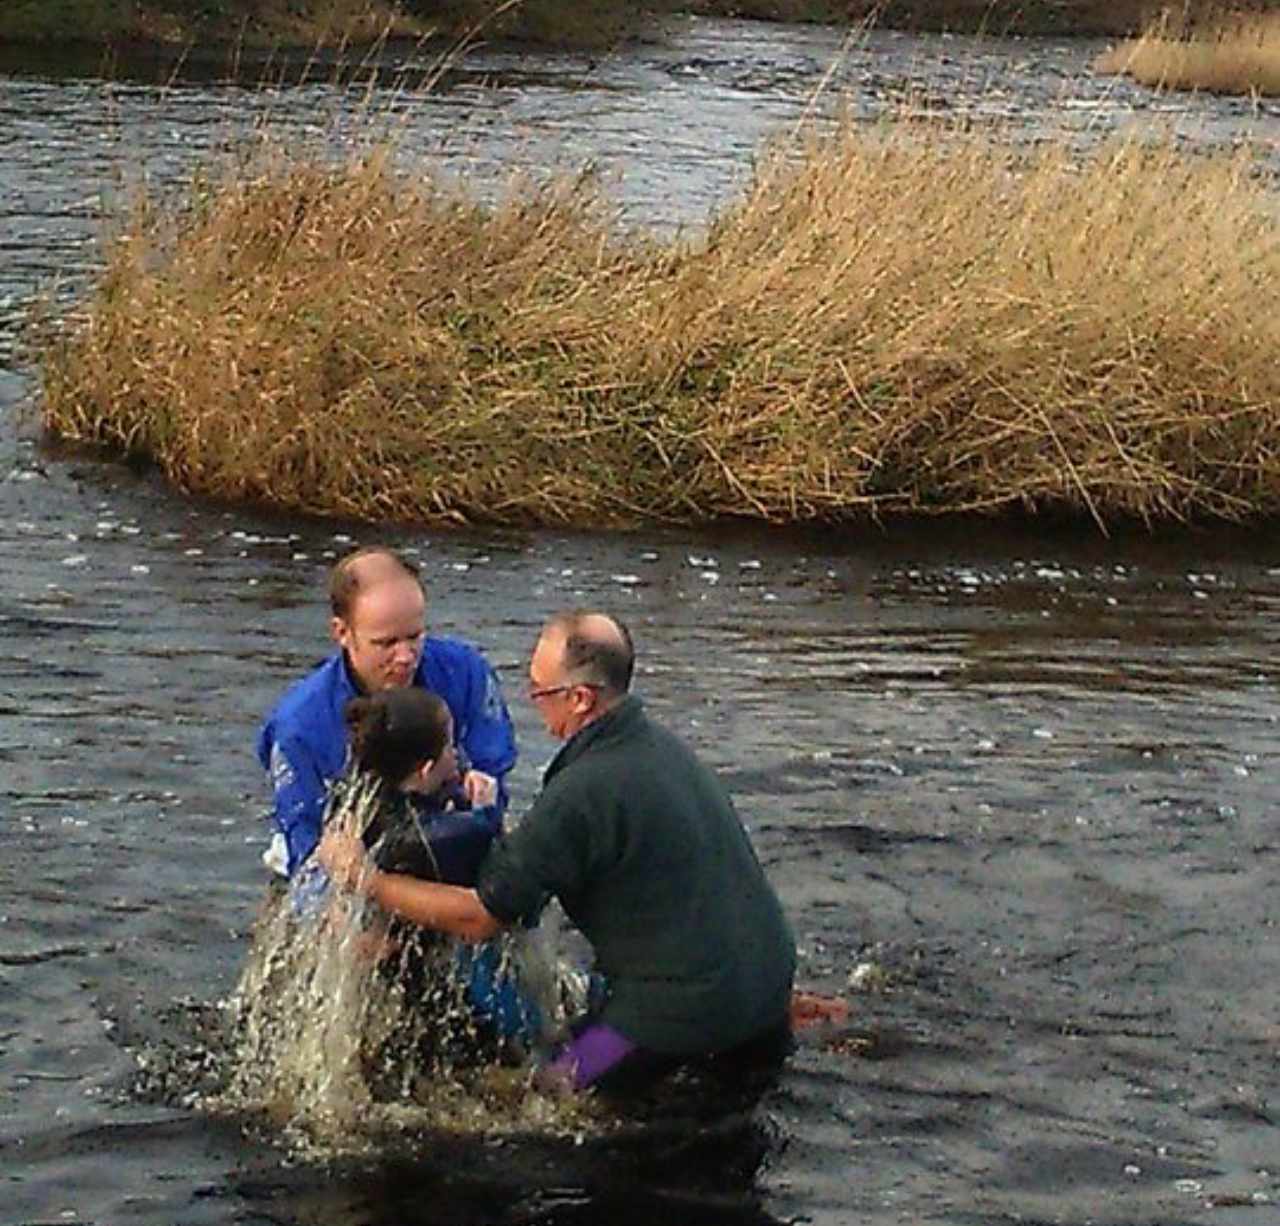 Hannah being baptised in the river